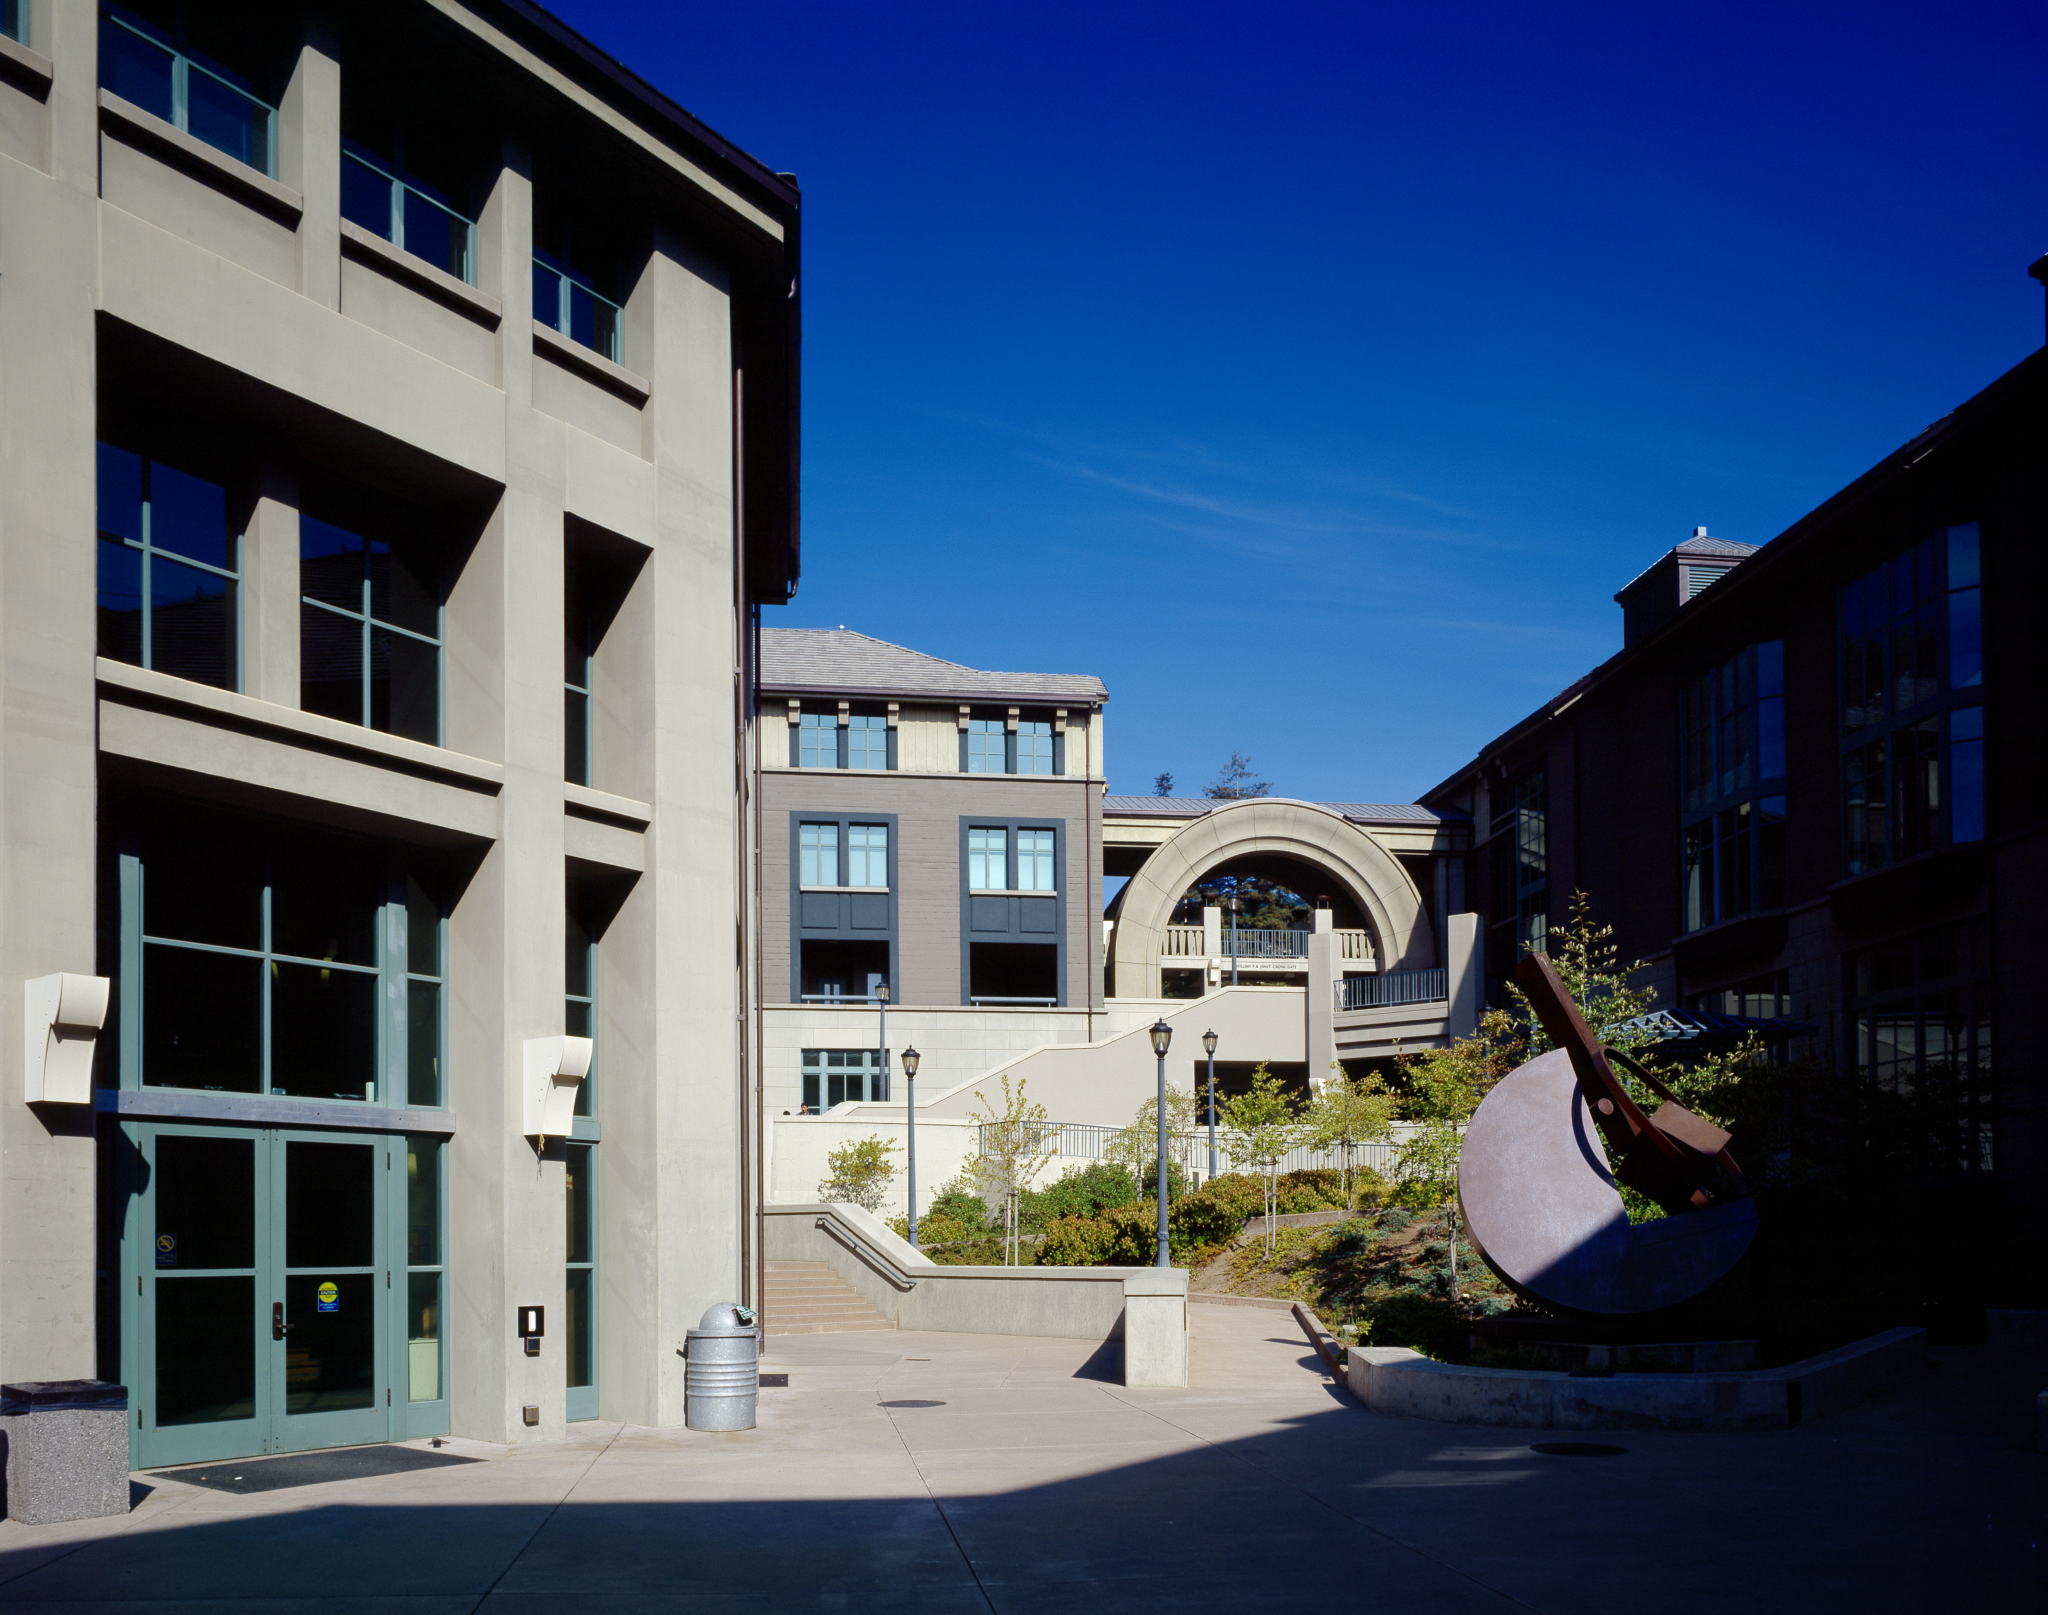 Haas School of Business courtyard. Photo by Alan Nyiri, courtesy of the Atkinson Photographic Archive